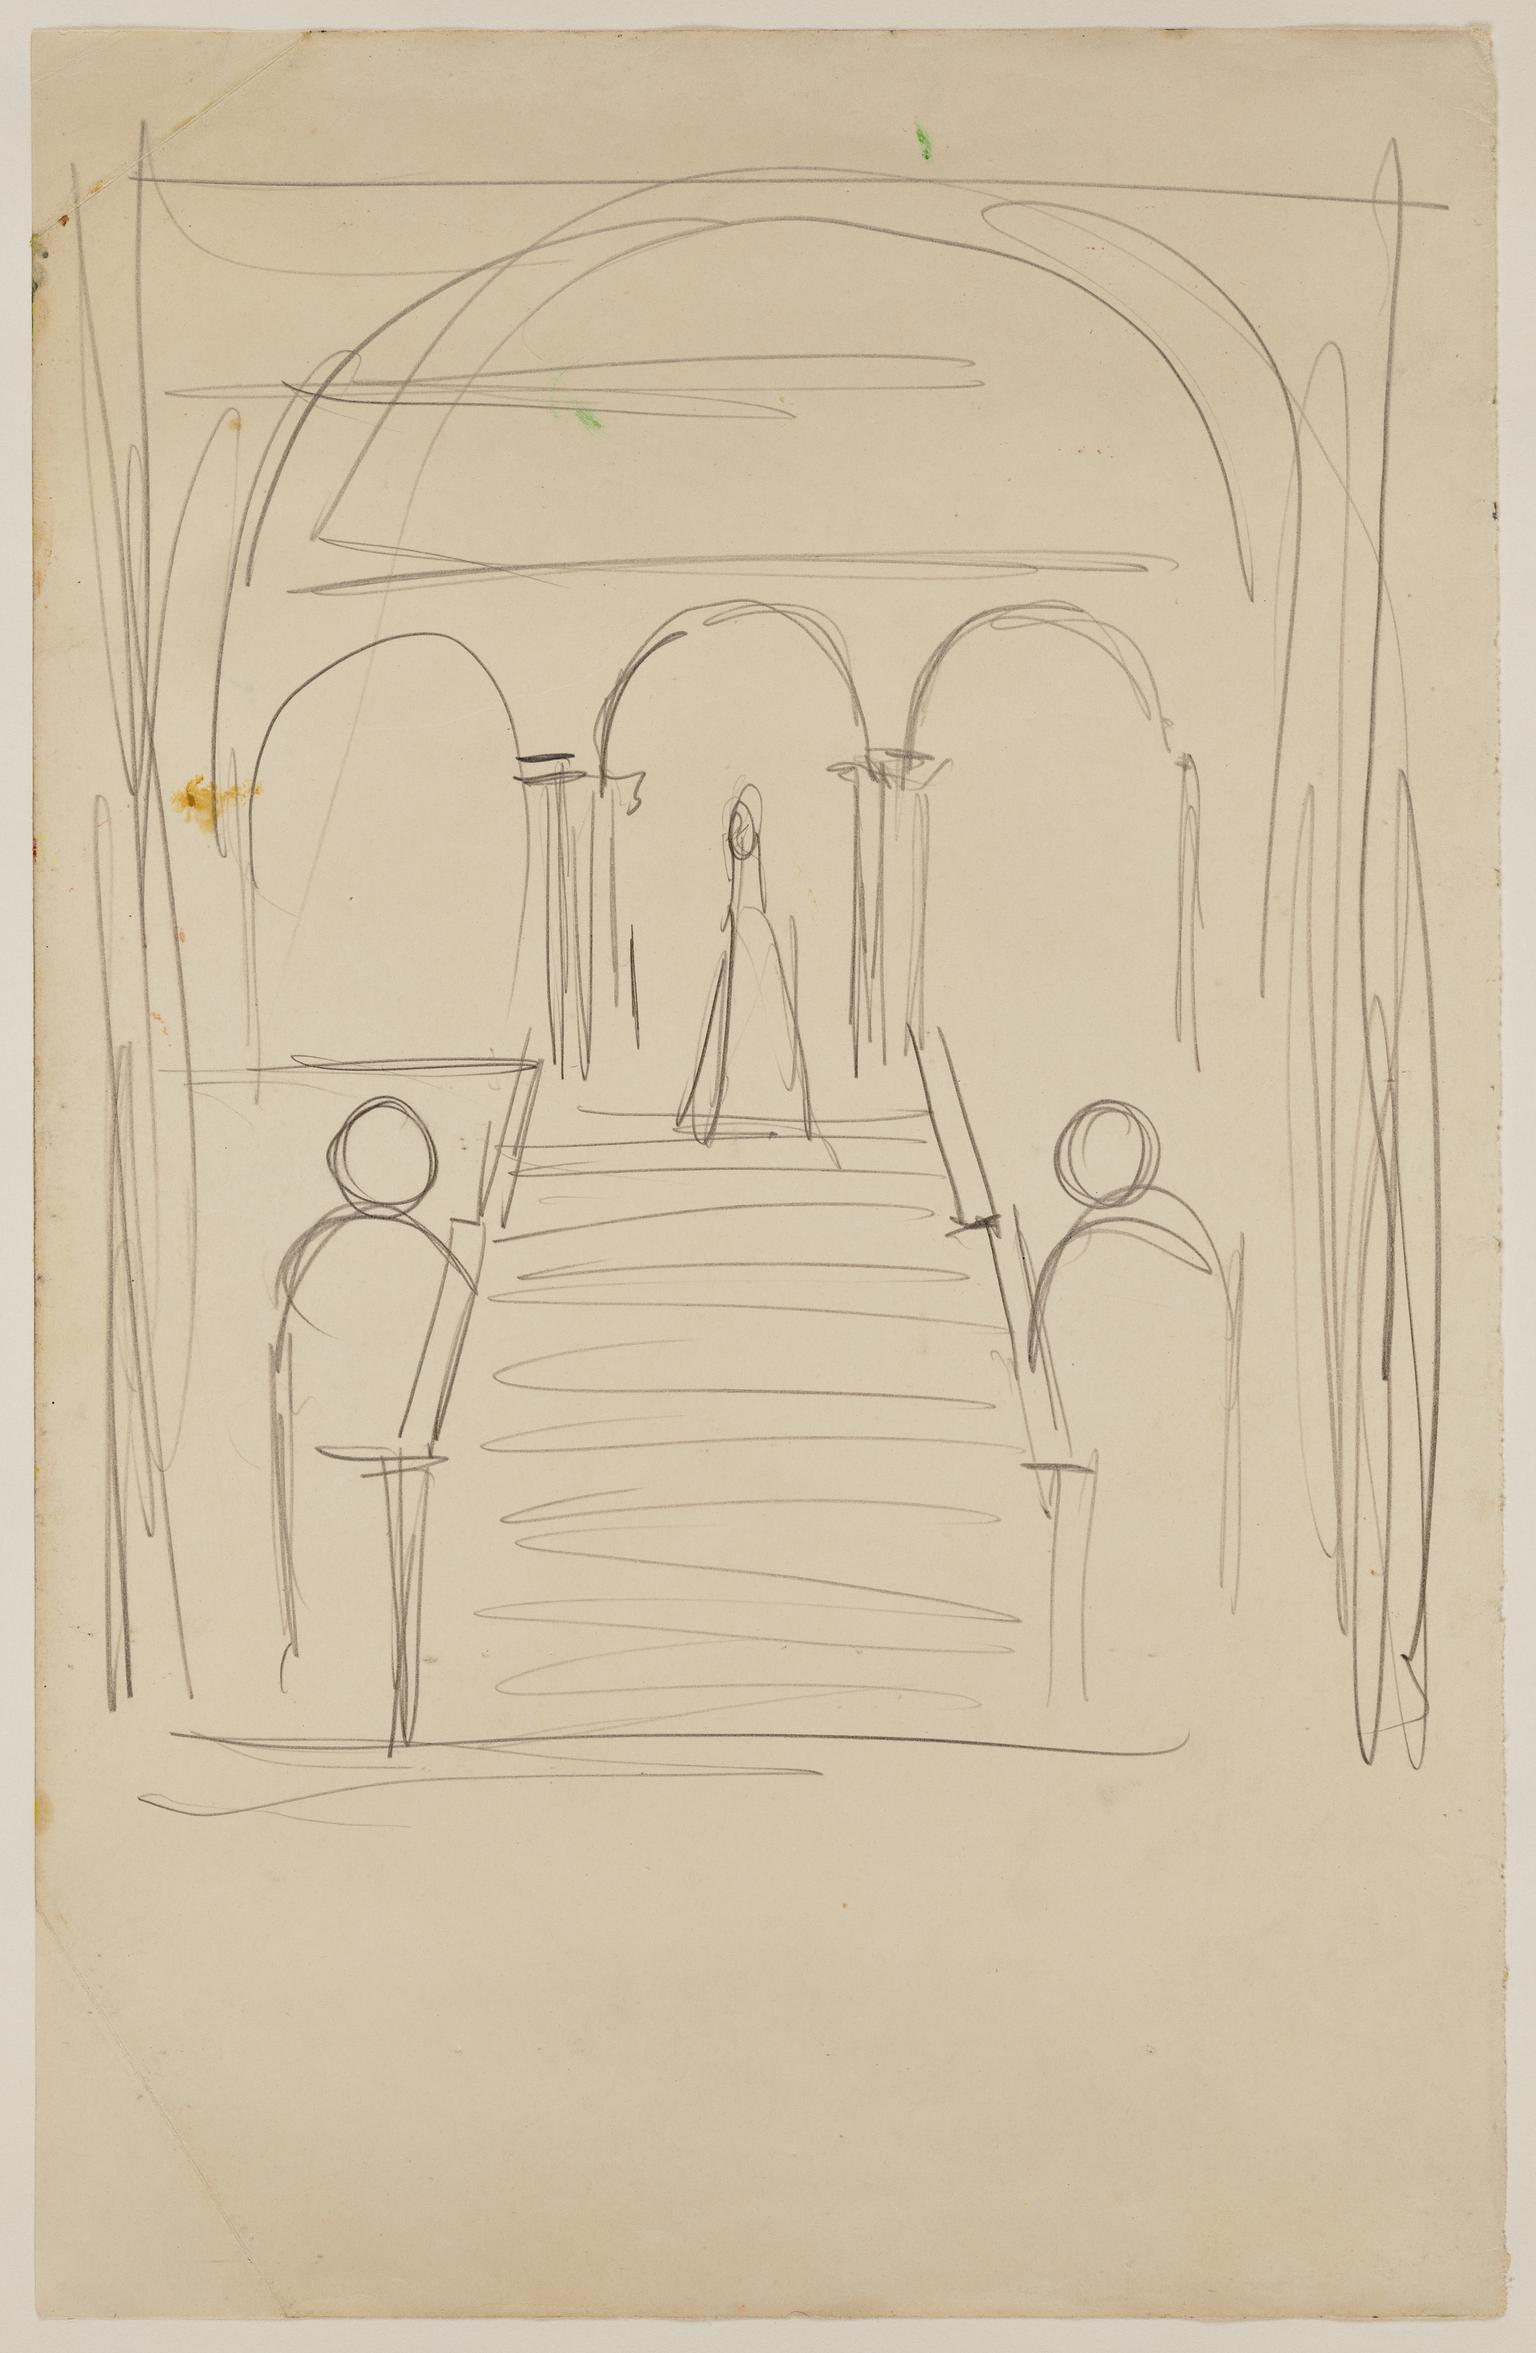 Sketch of steps and archways